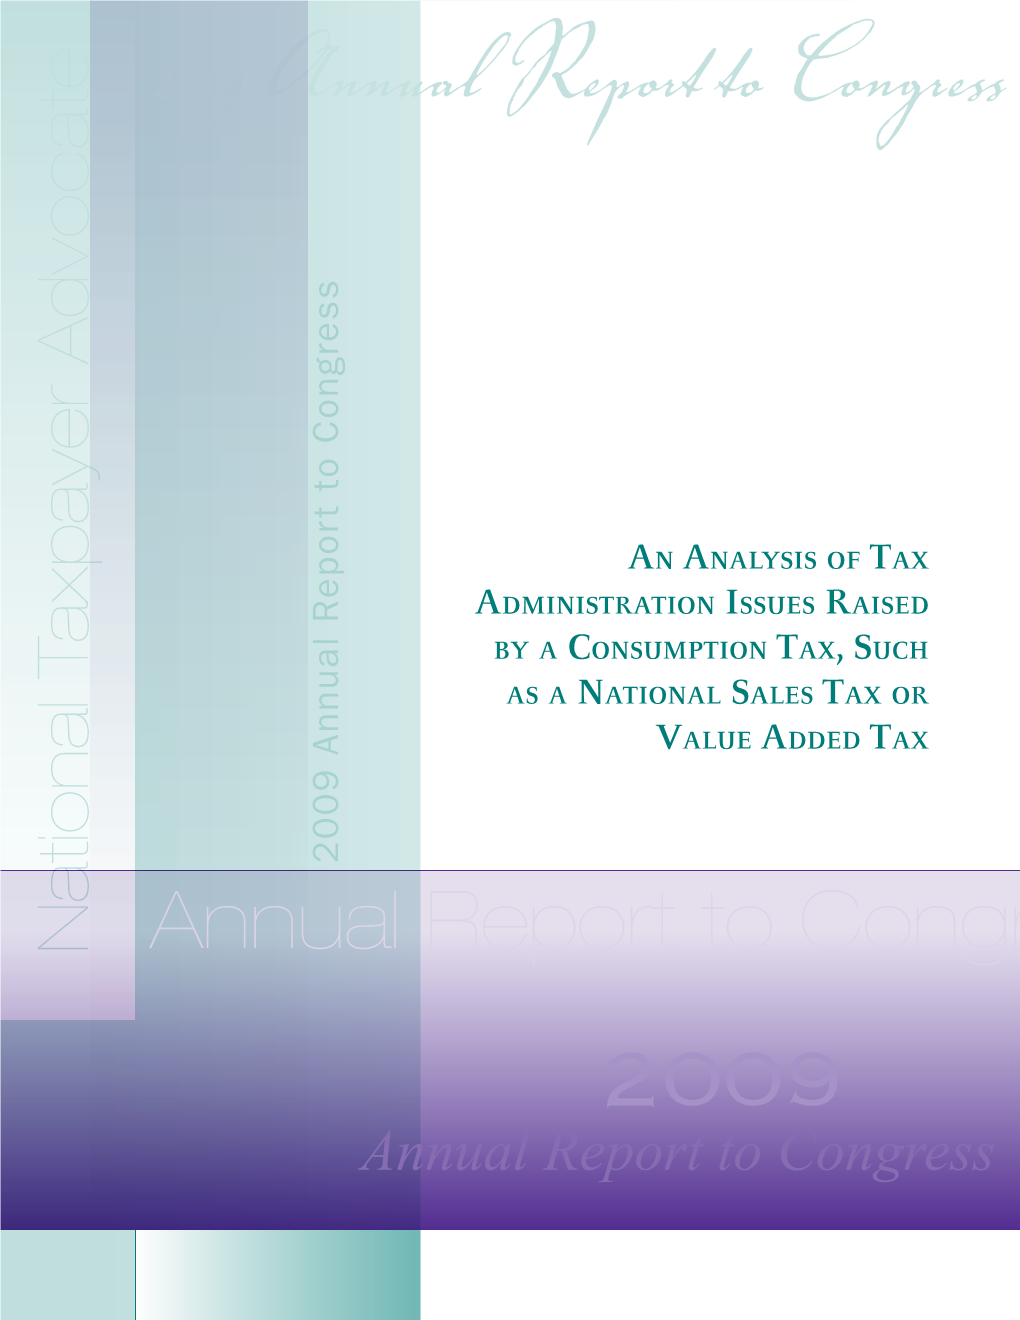 An Analysis of Tax Administration Issues Raised by a Consumption Tax, Such As a National Sales Tax Or Value Added Tax